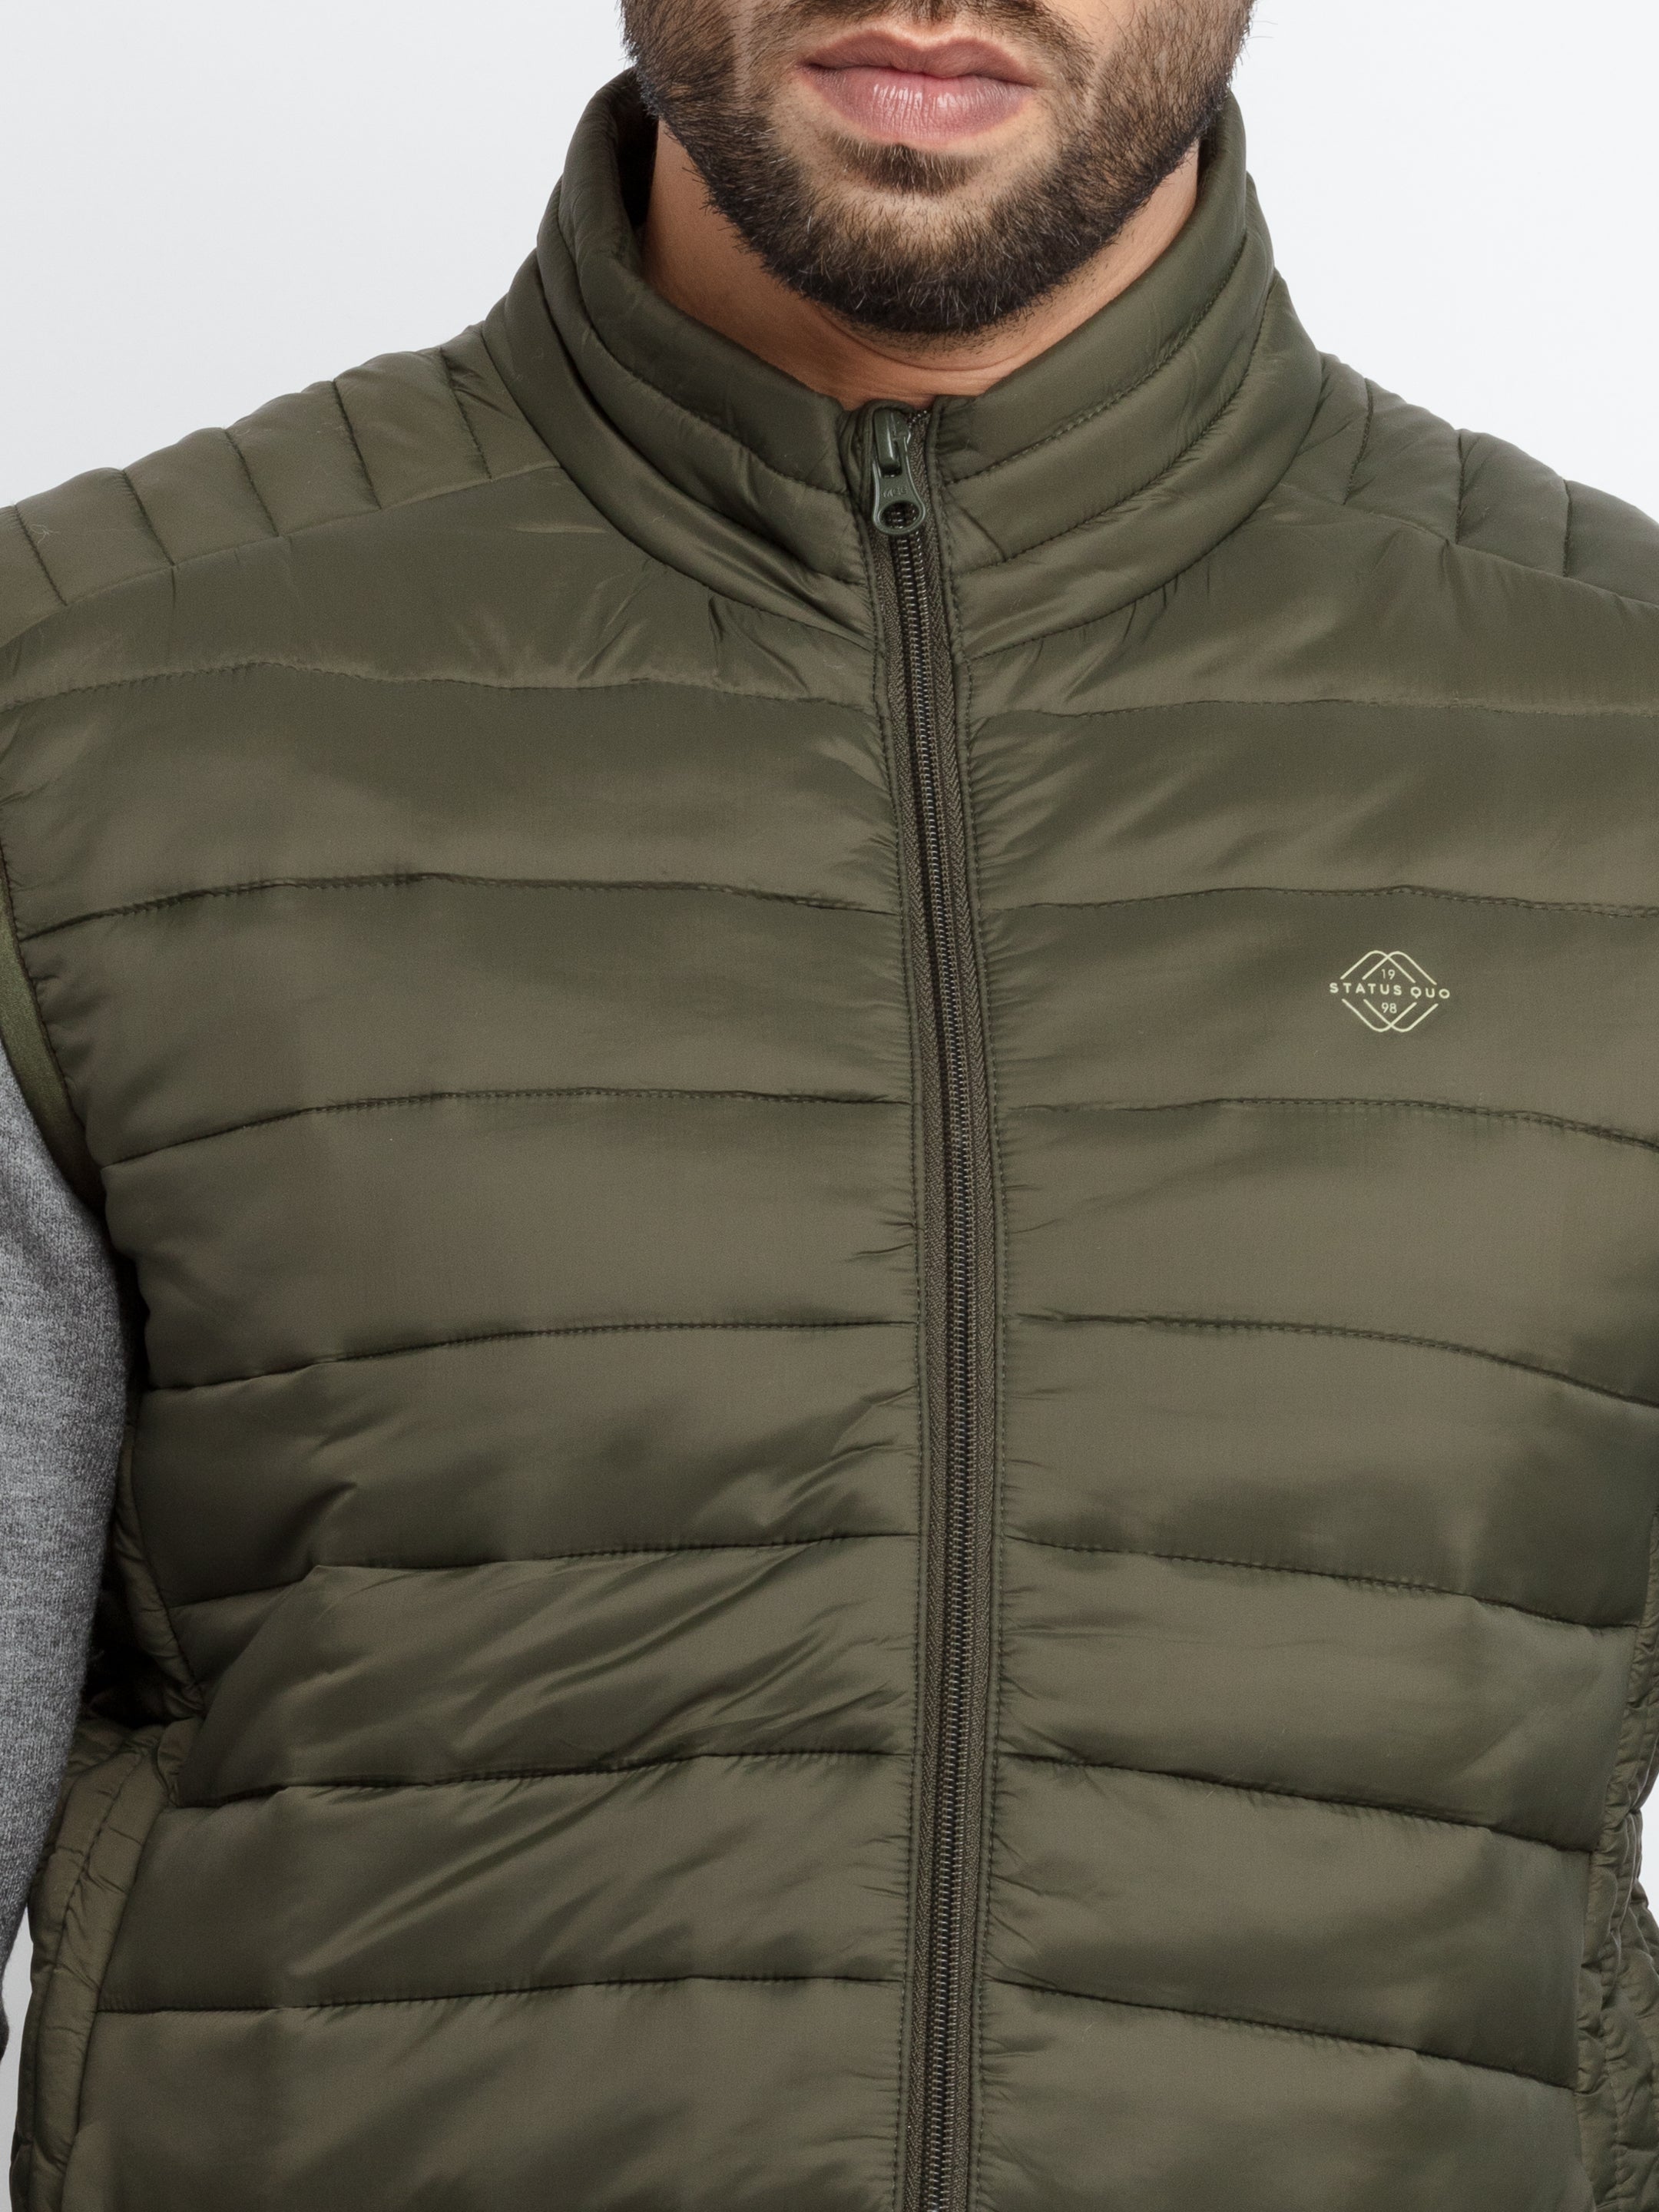 Mens Quilted High Neck Sleeveless Jacket